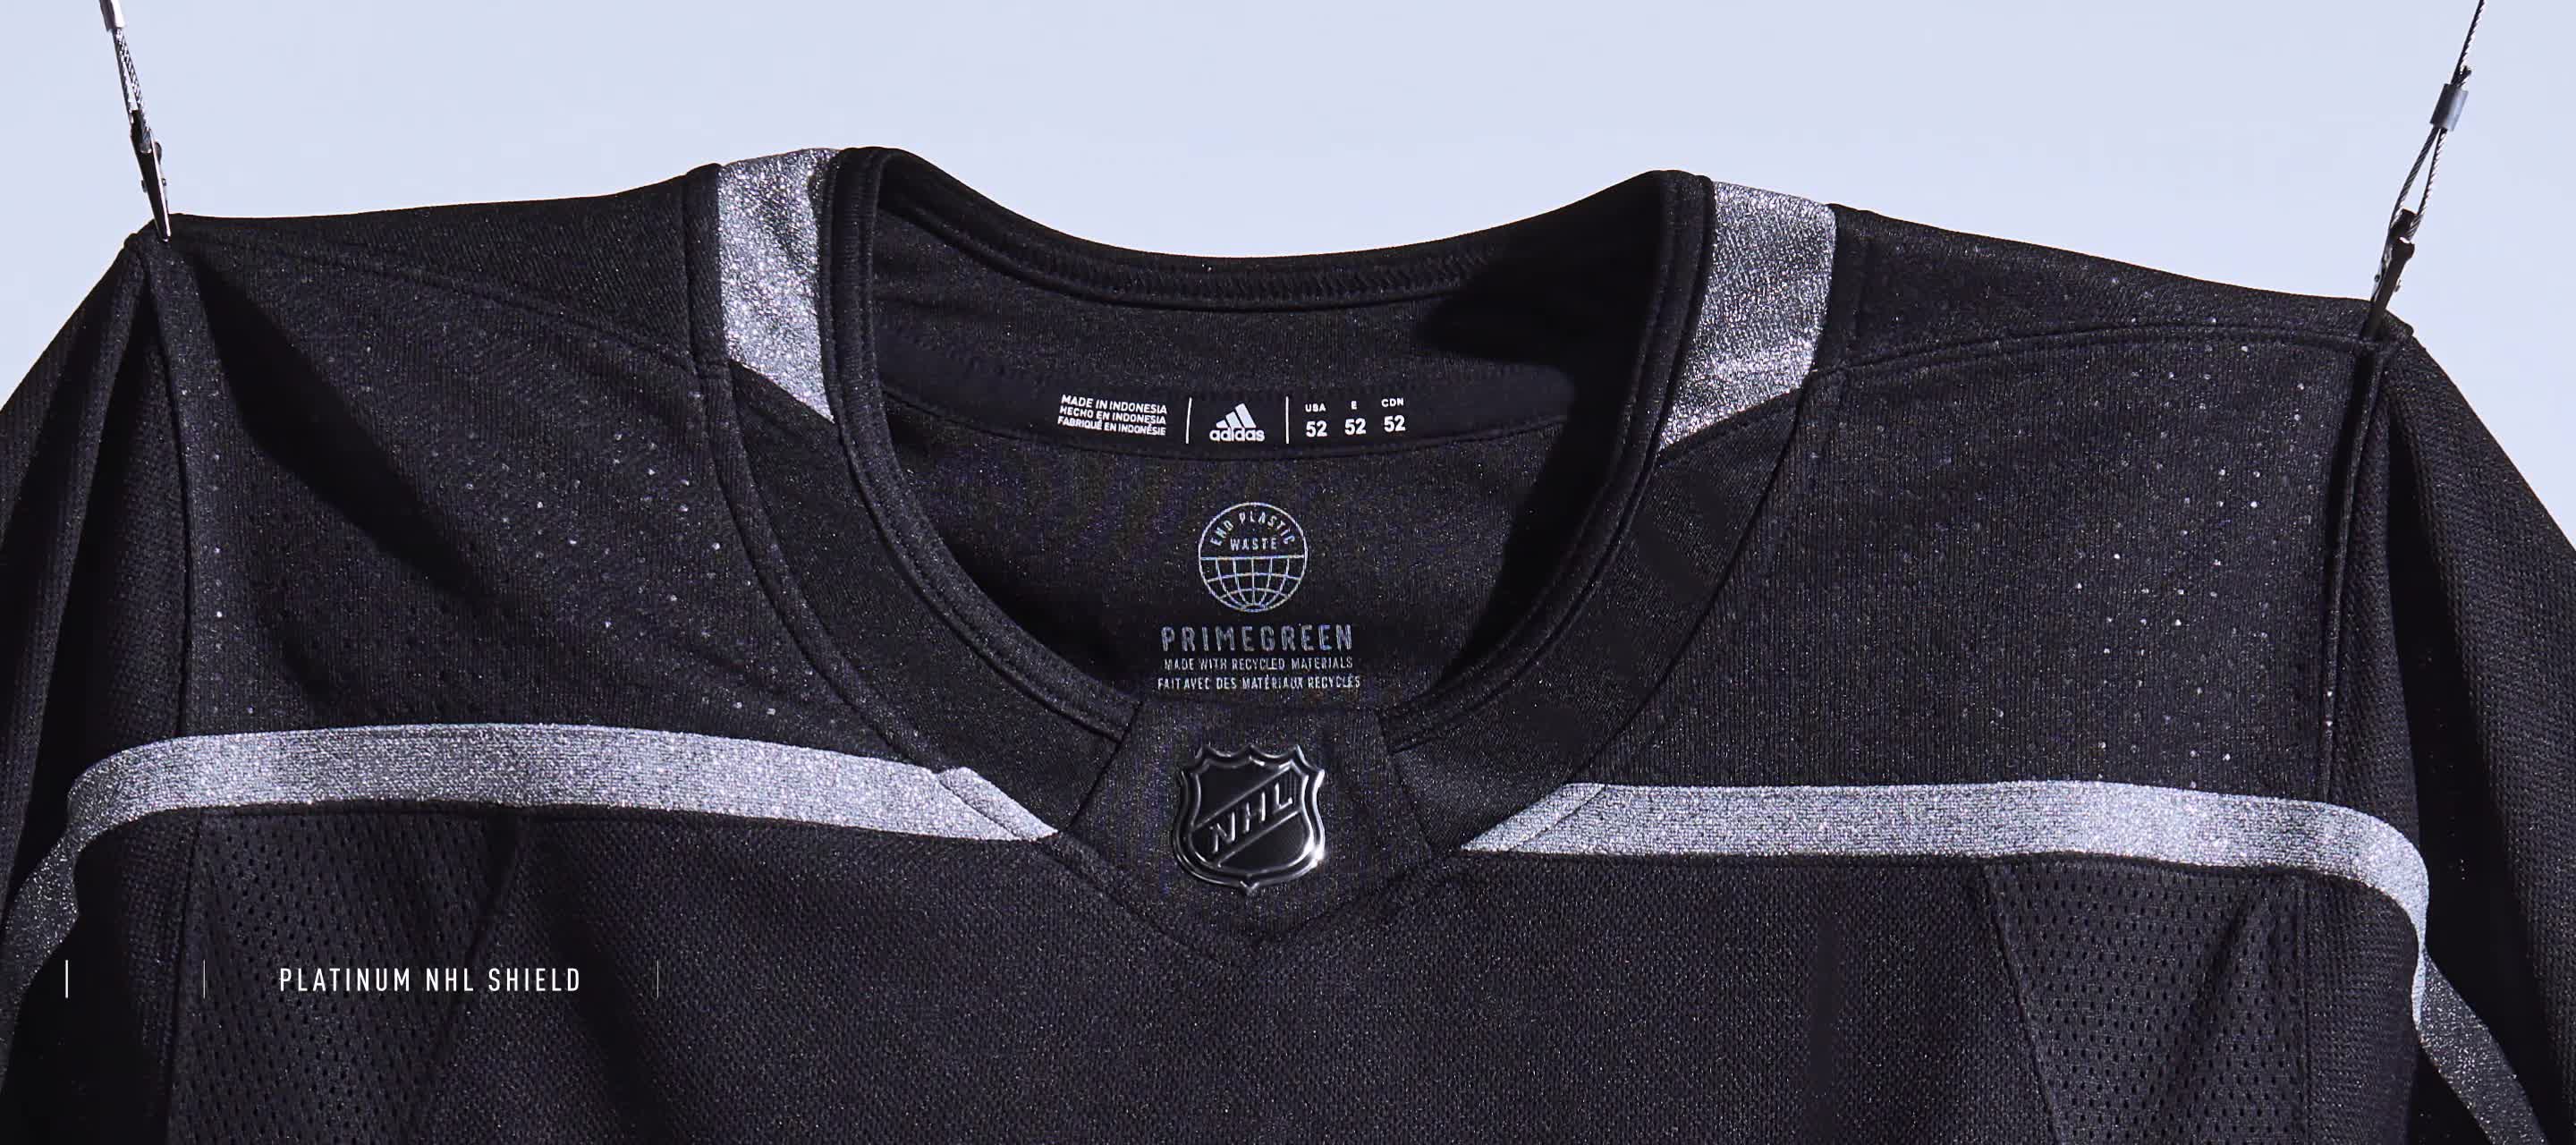 NHL officially announces adidas as new outfitter of NHL on-ice jerseys,  licensed apparel and headware